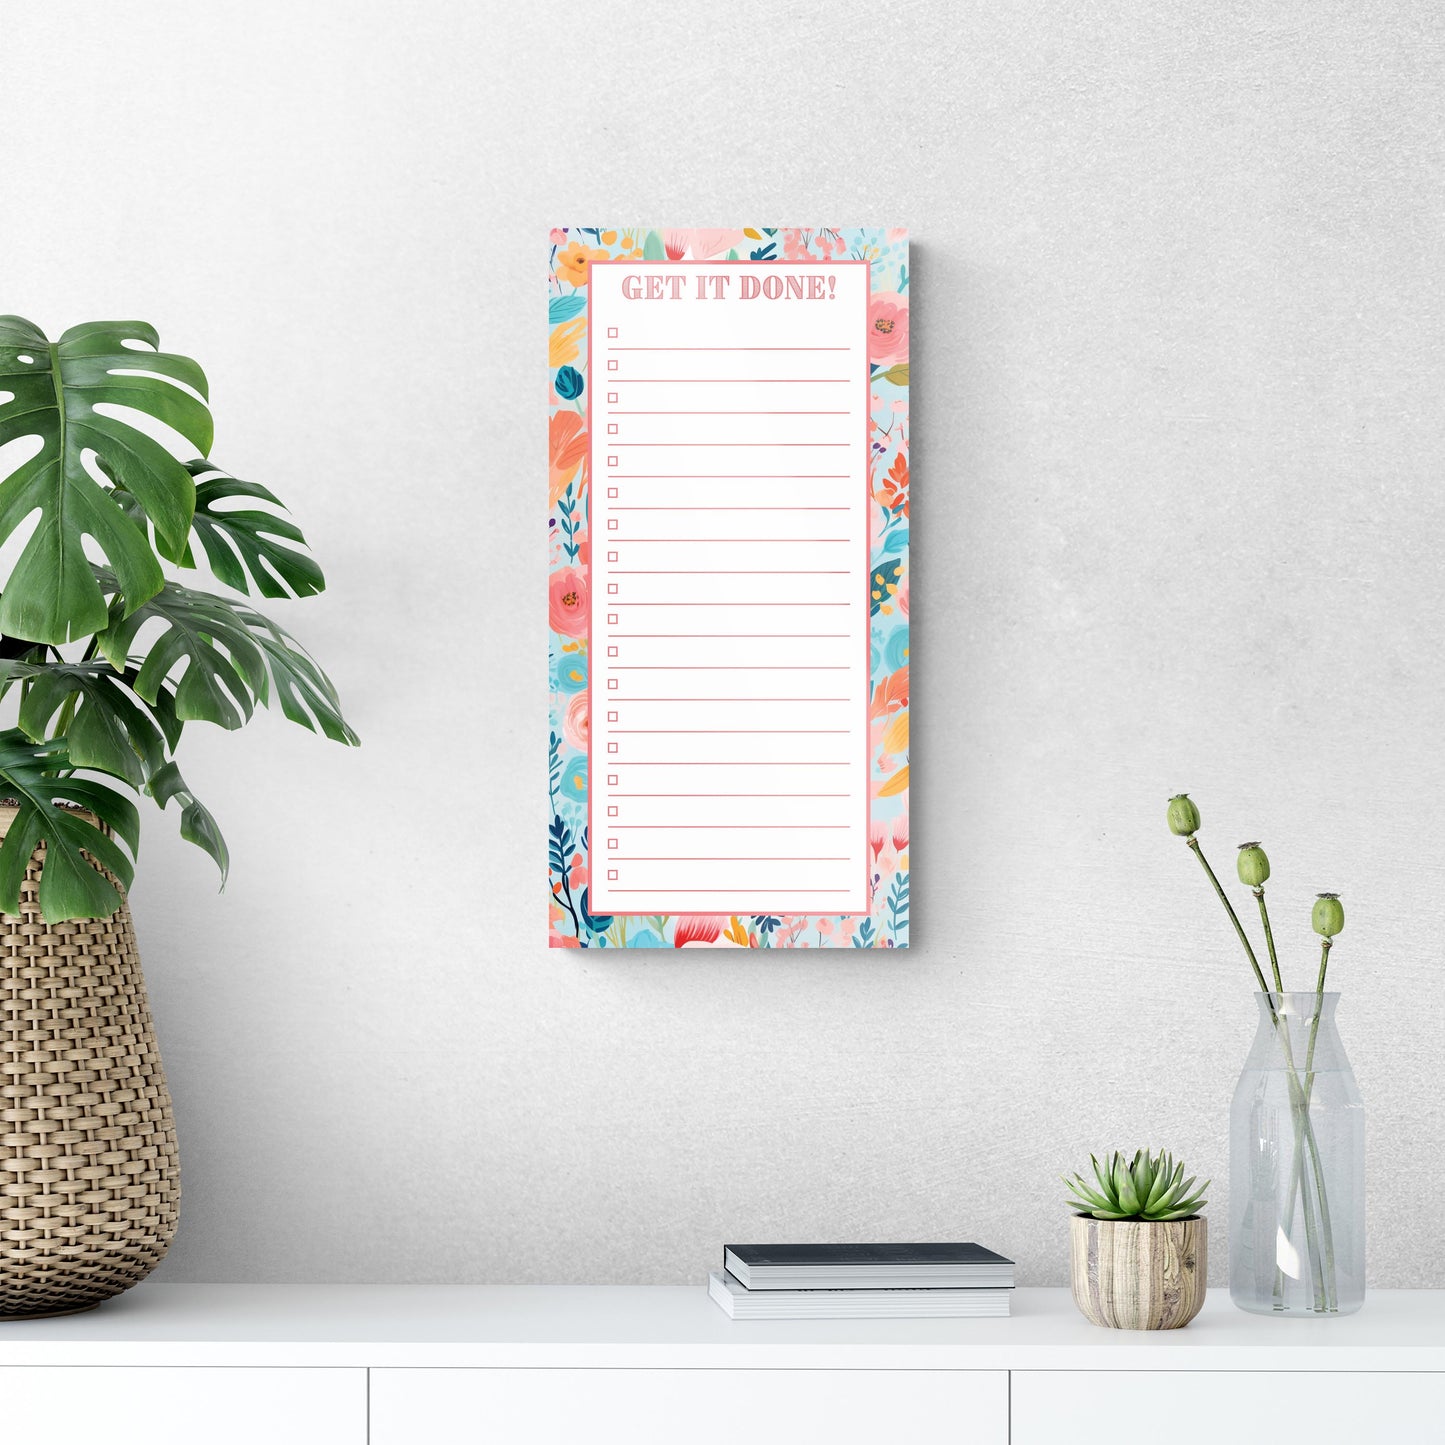 Spring Tracker Floral To Do List Get It Done! | 12x24